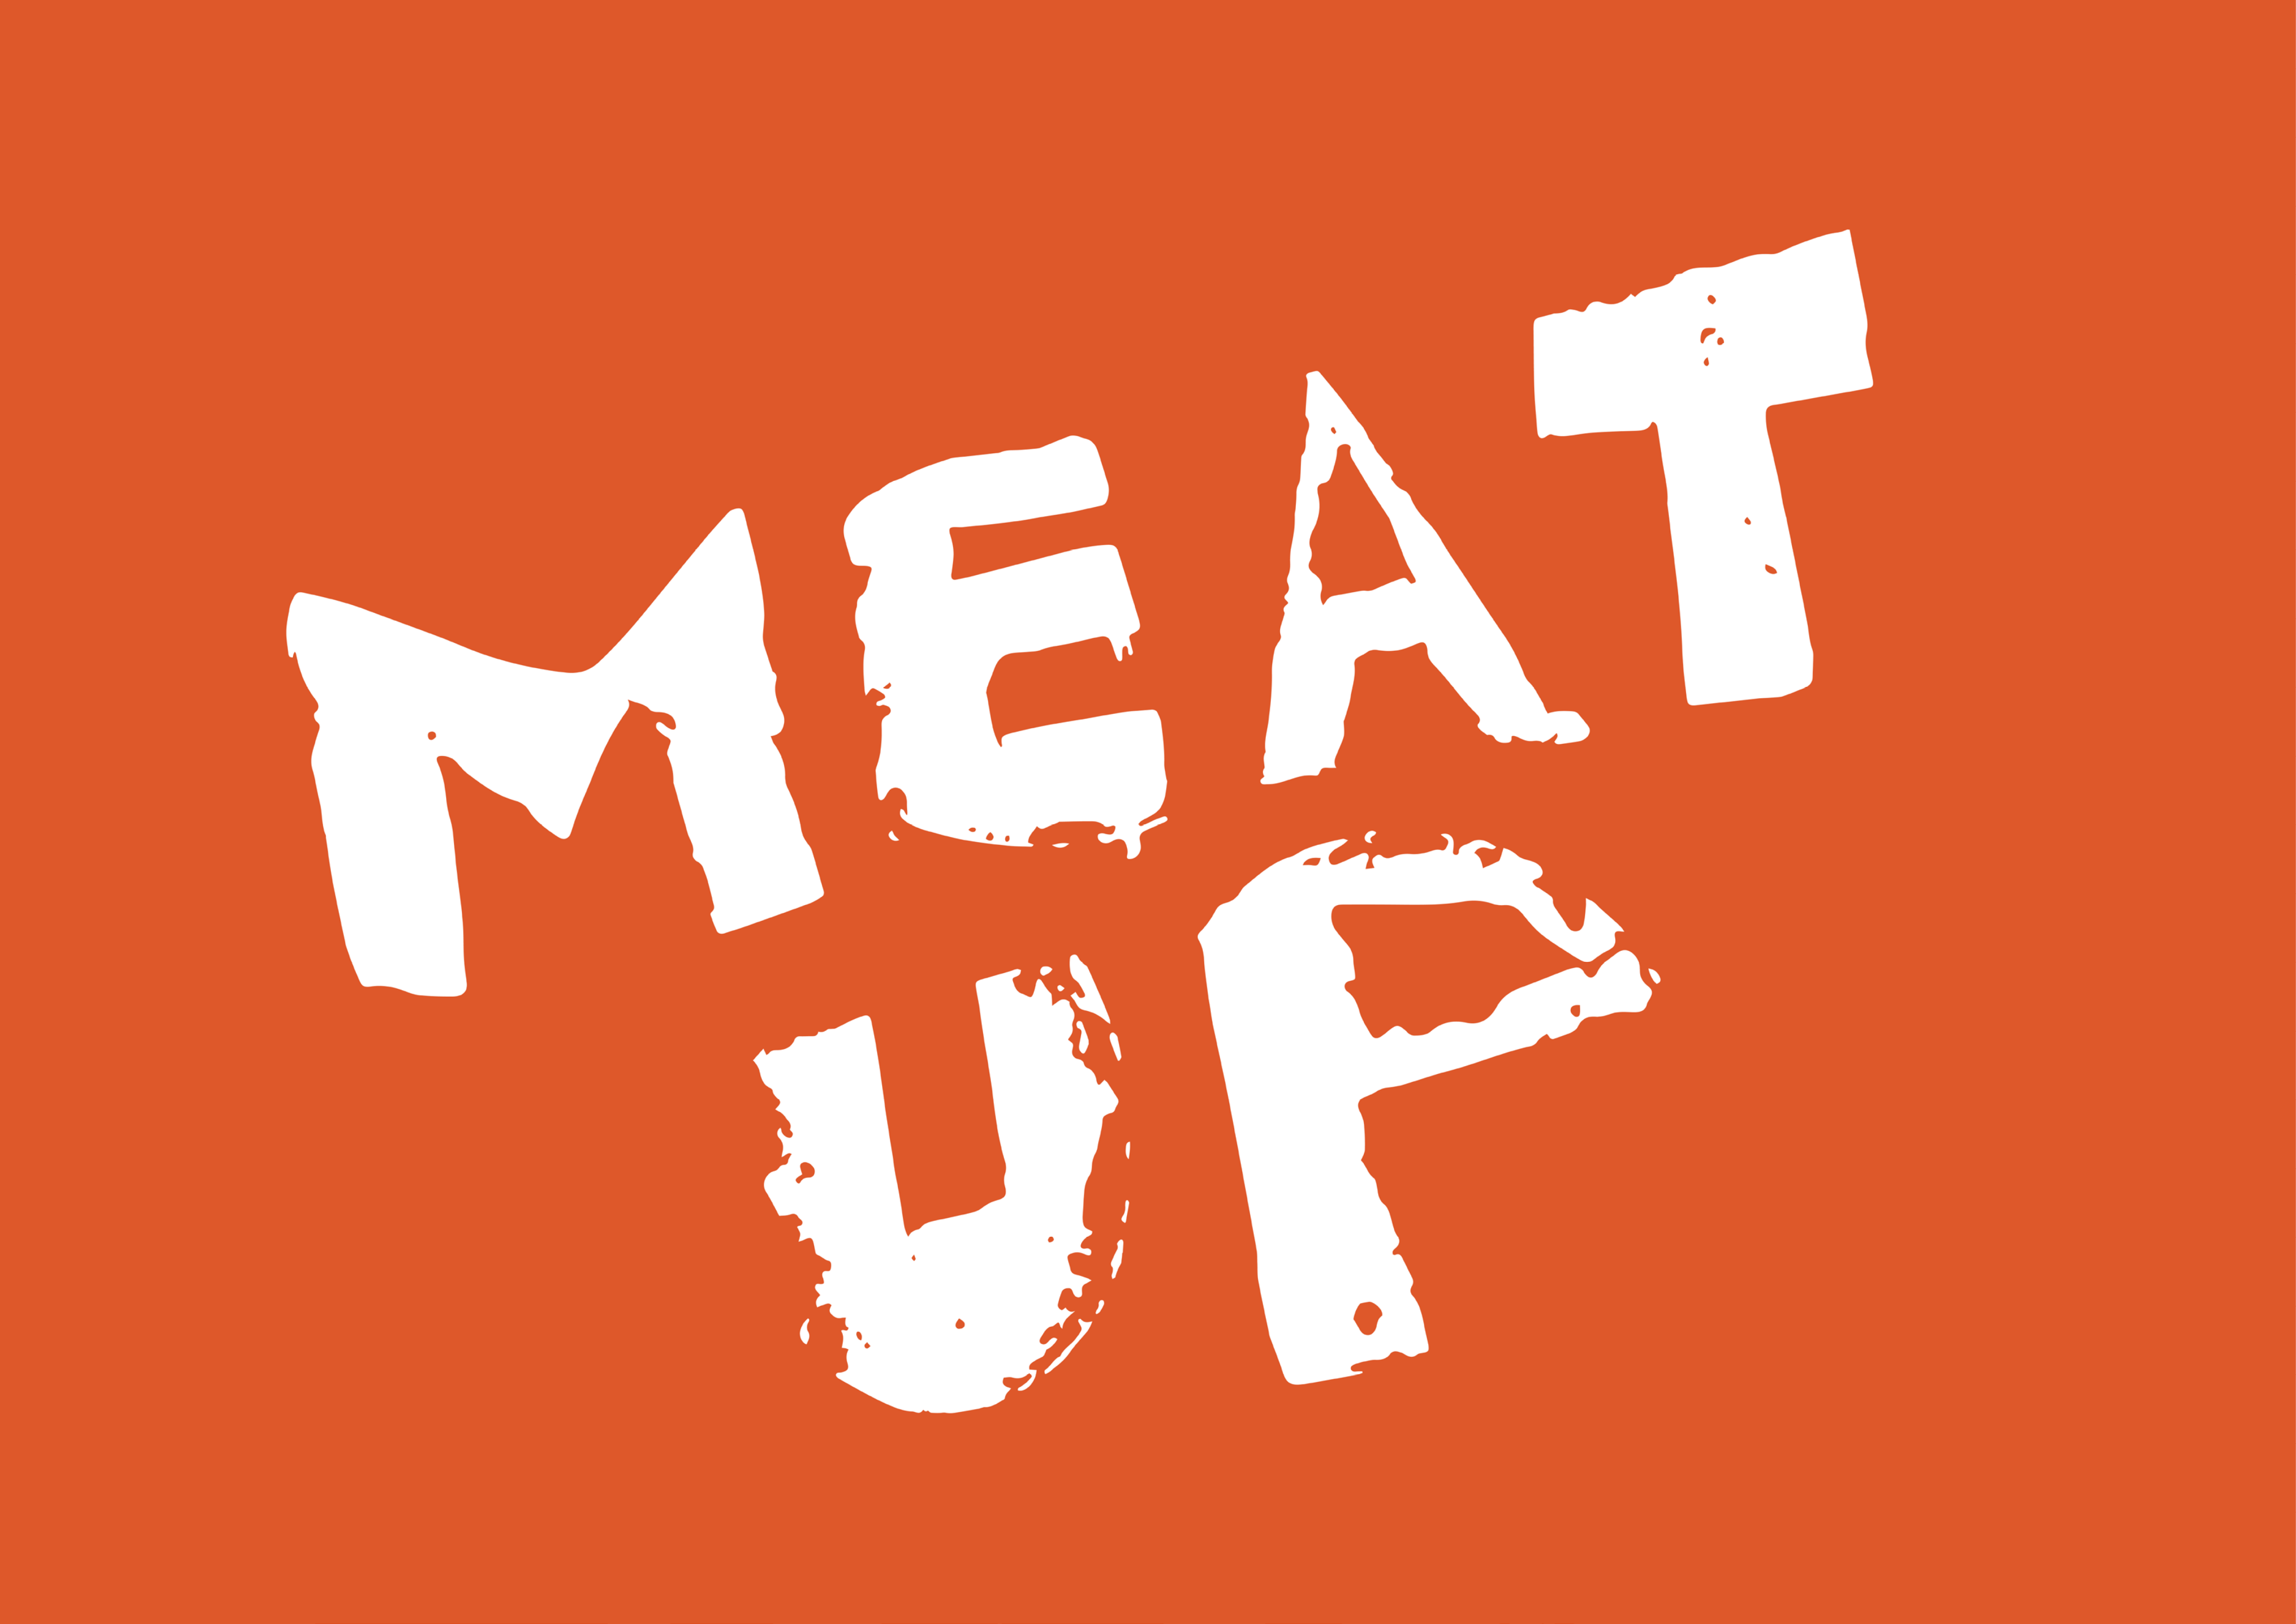 Orange backdrop with text large in centre saying 'Meat Up' in white.